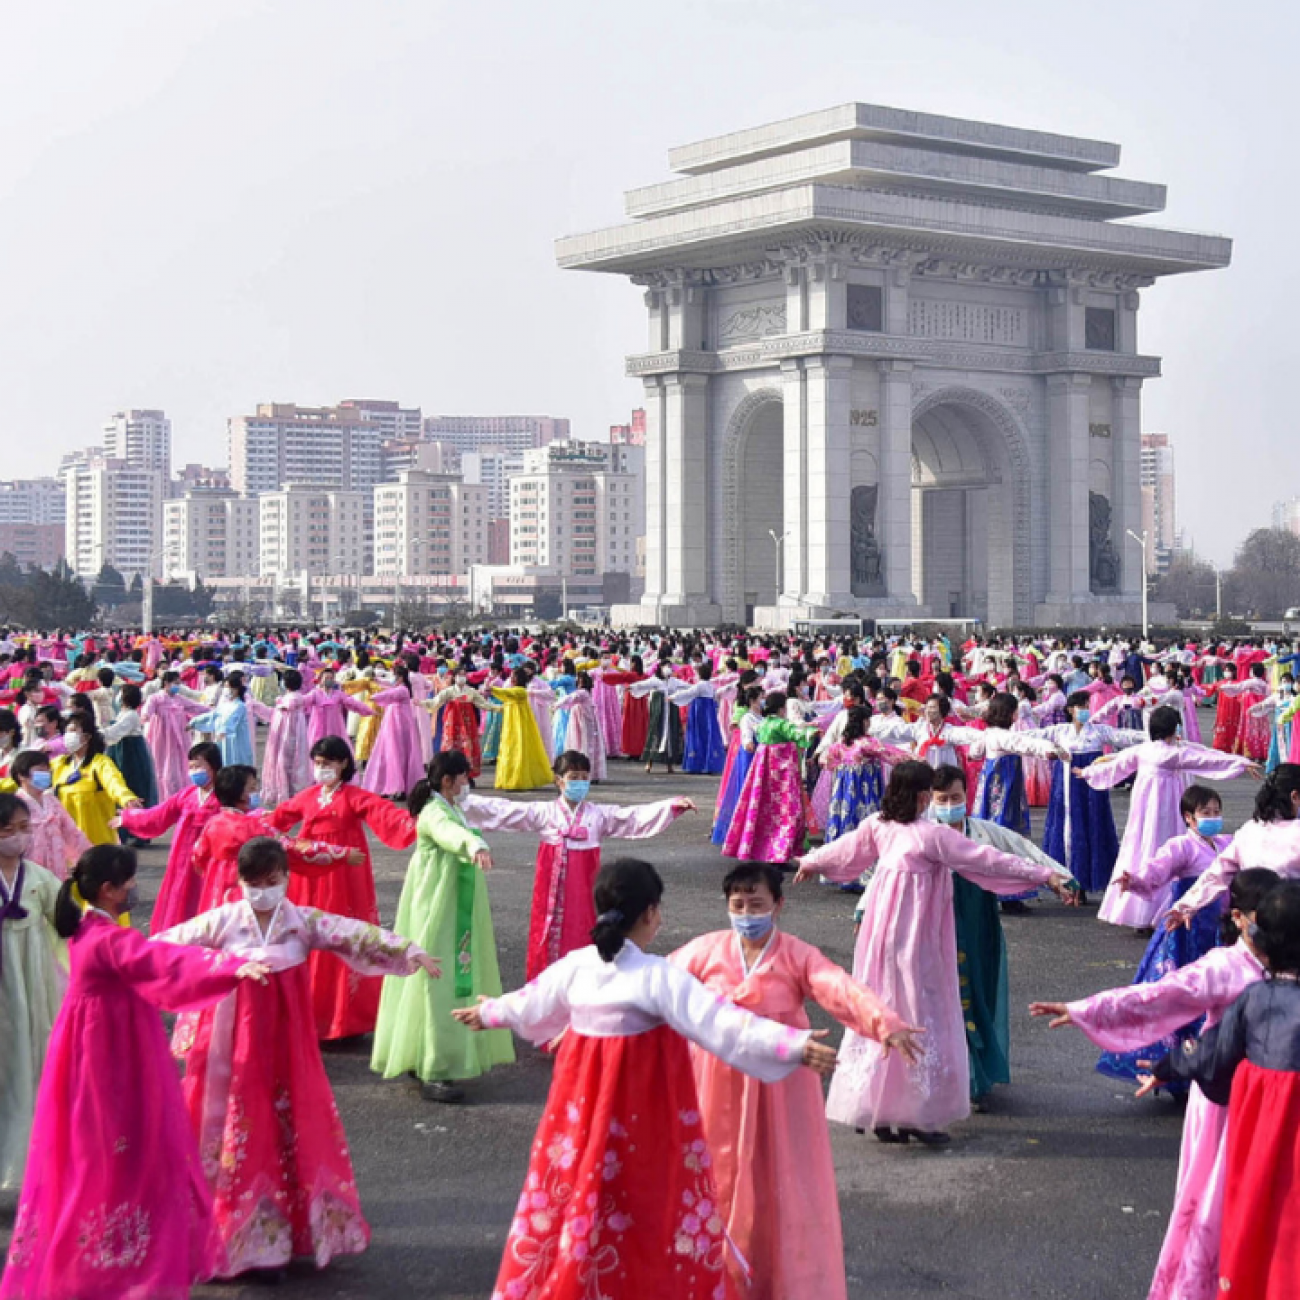 Hundreds of women dressed in pink and white traditional North Korean gowns stand in rows in a central area of Pyongyang, North Korea, on Women's Day in March 2022.